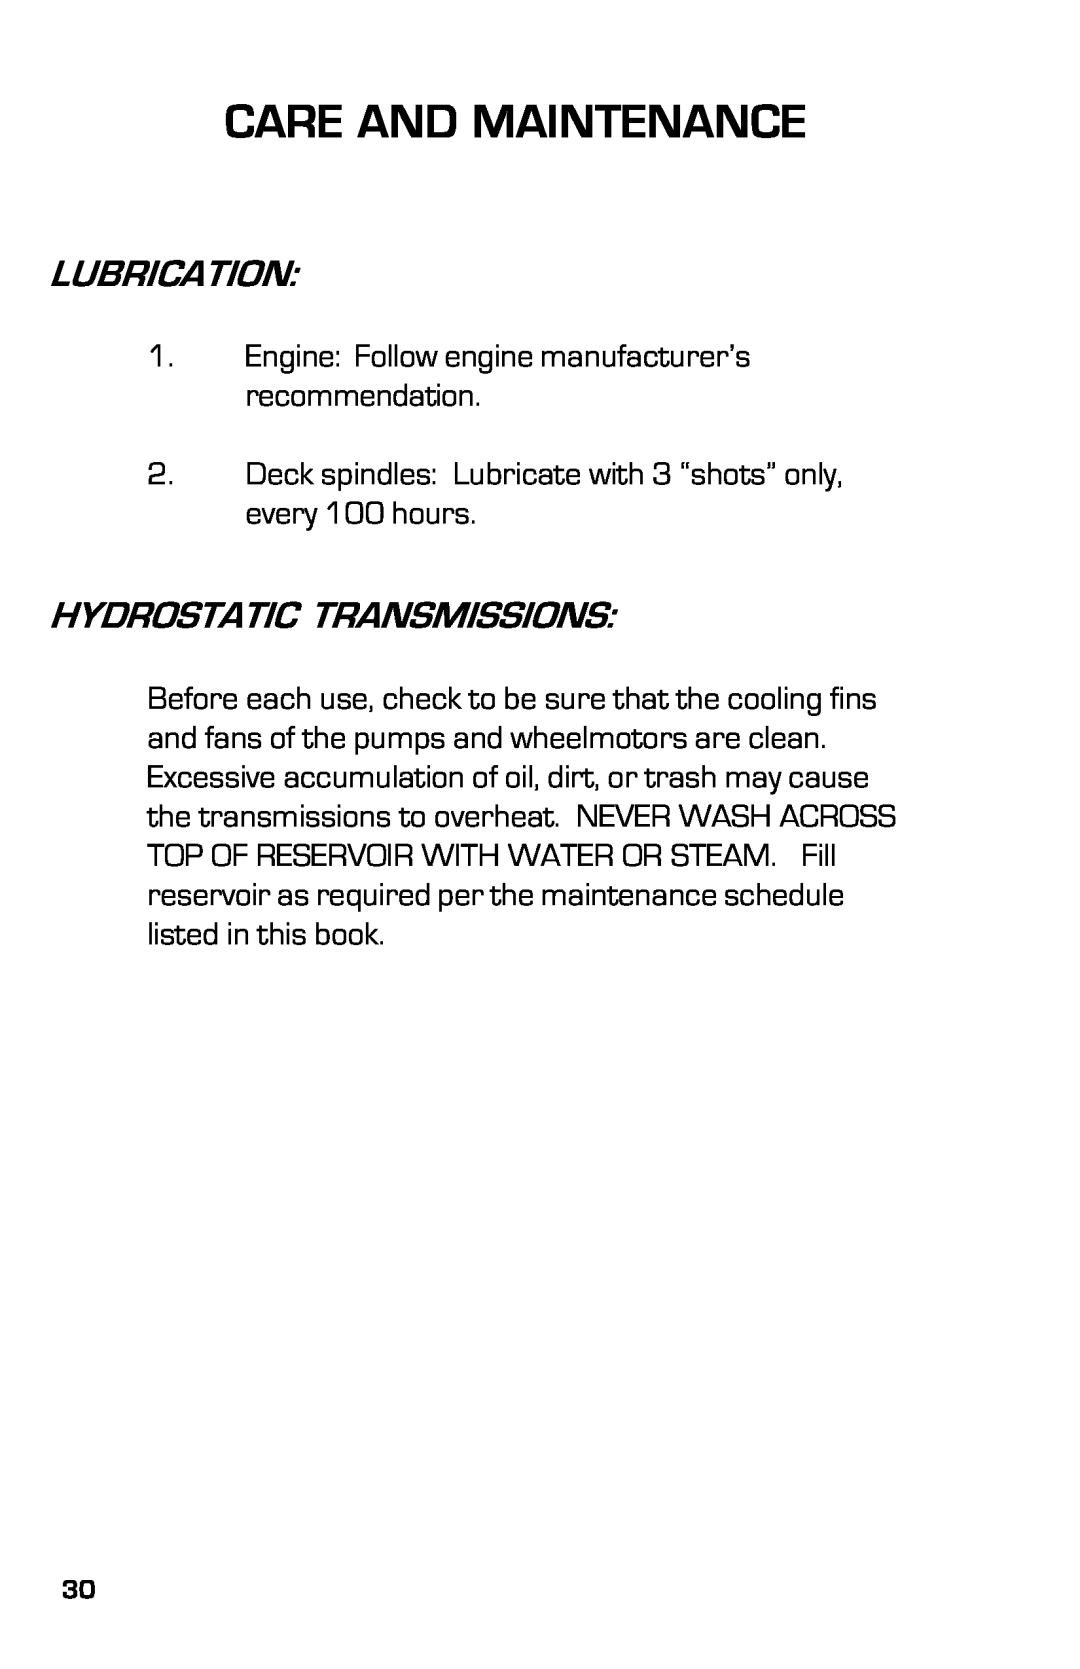 Dixon ZTR 7525, 13636-0702 manual Lubrication, Hydrostatic Transmissions, Care And Maintenance 